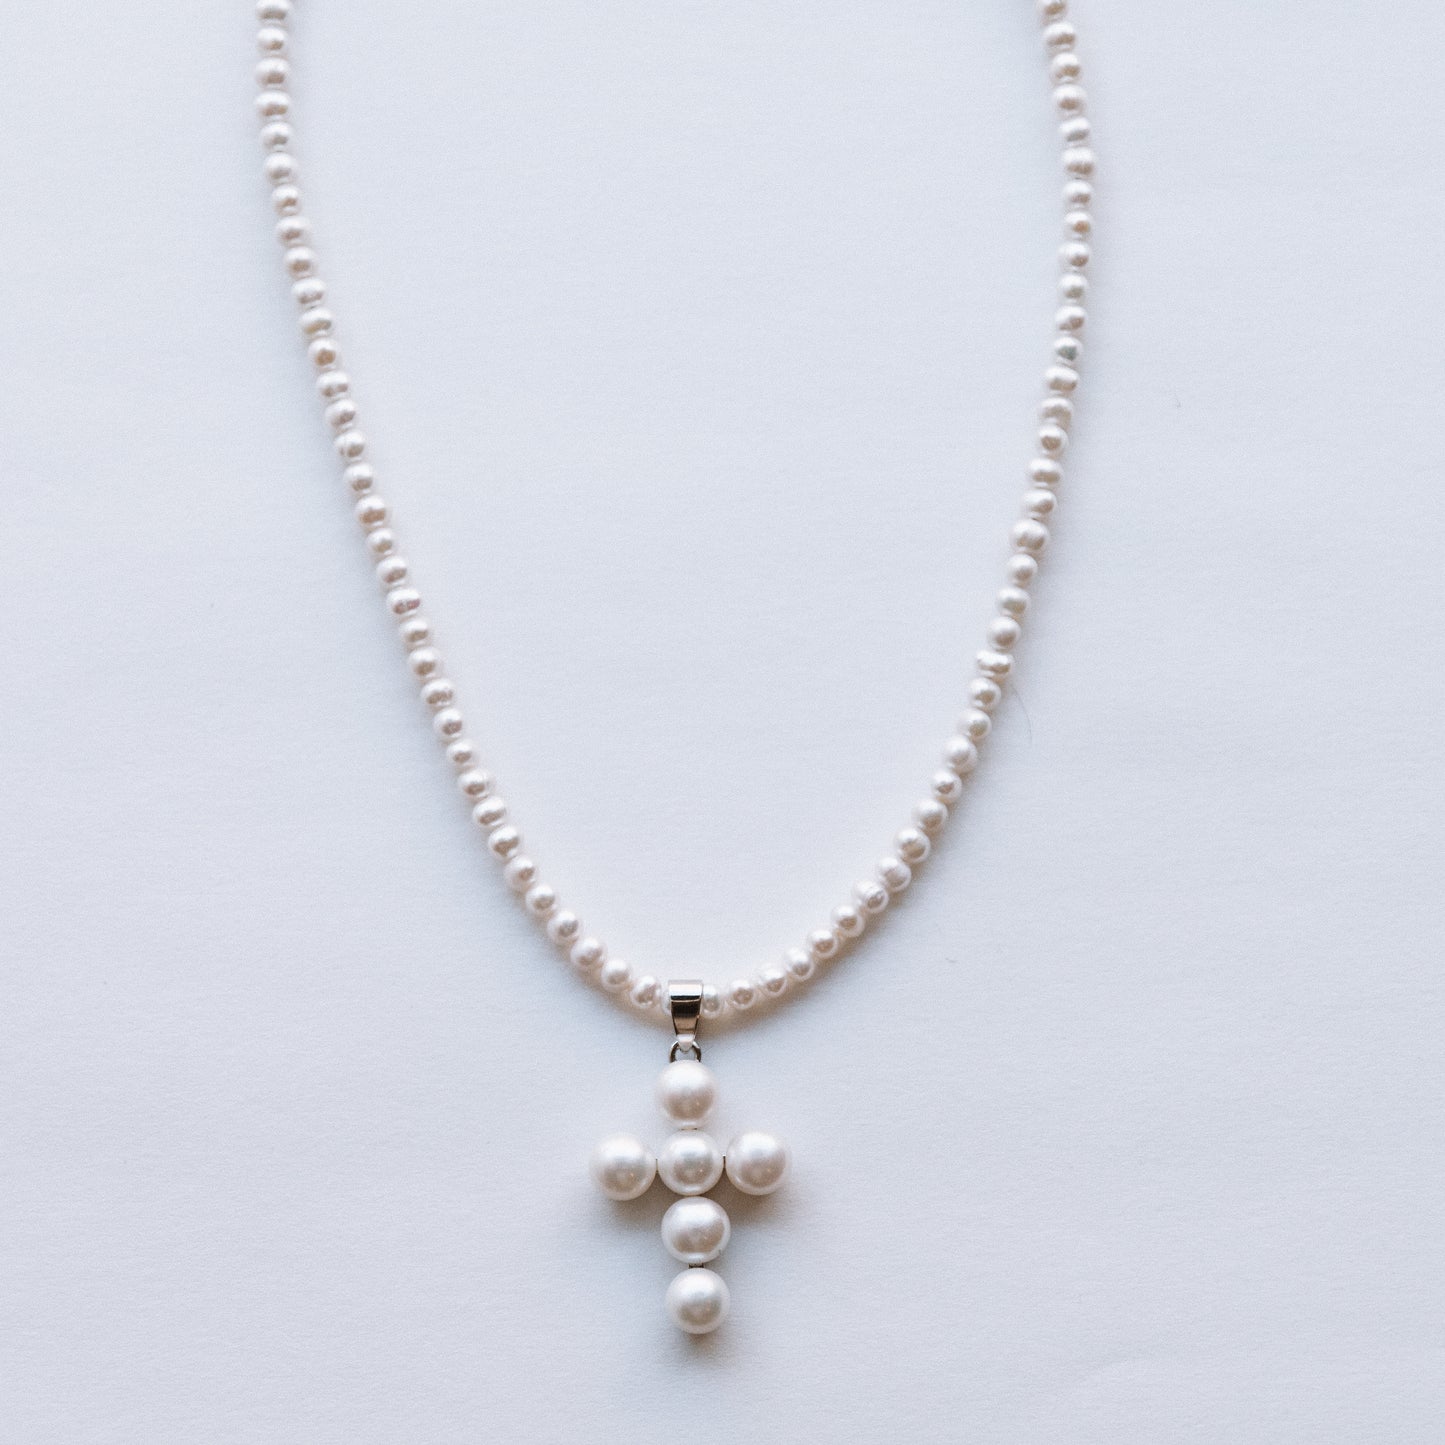 The Heavenly Pearl Necklace